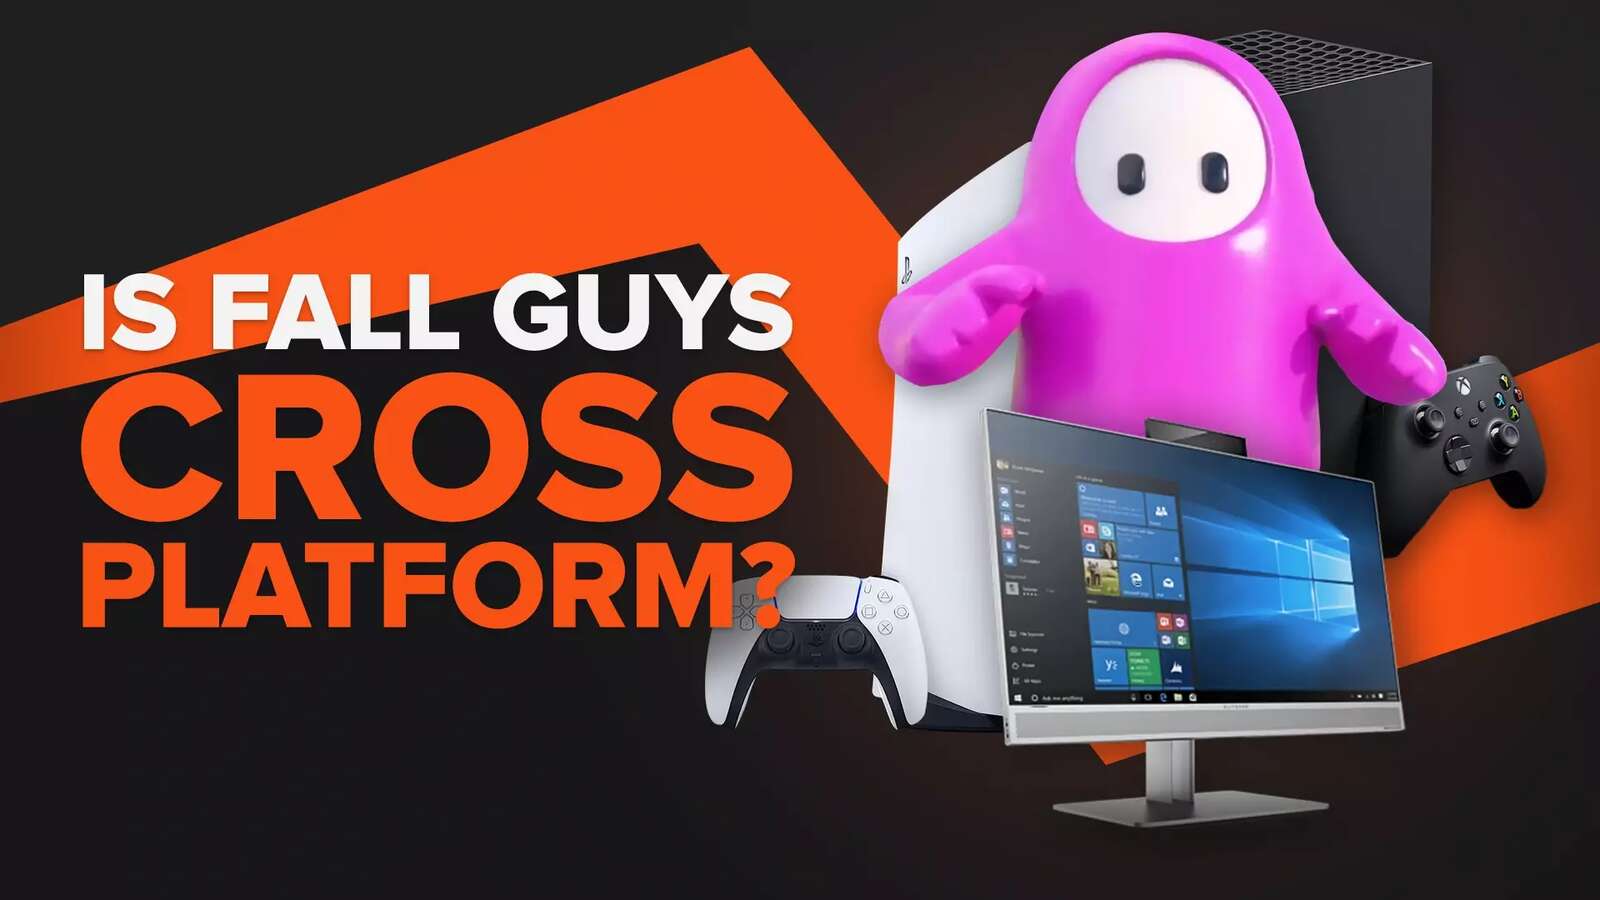 Does Fall Guys Support Cross-Platform Play?